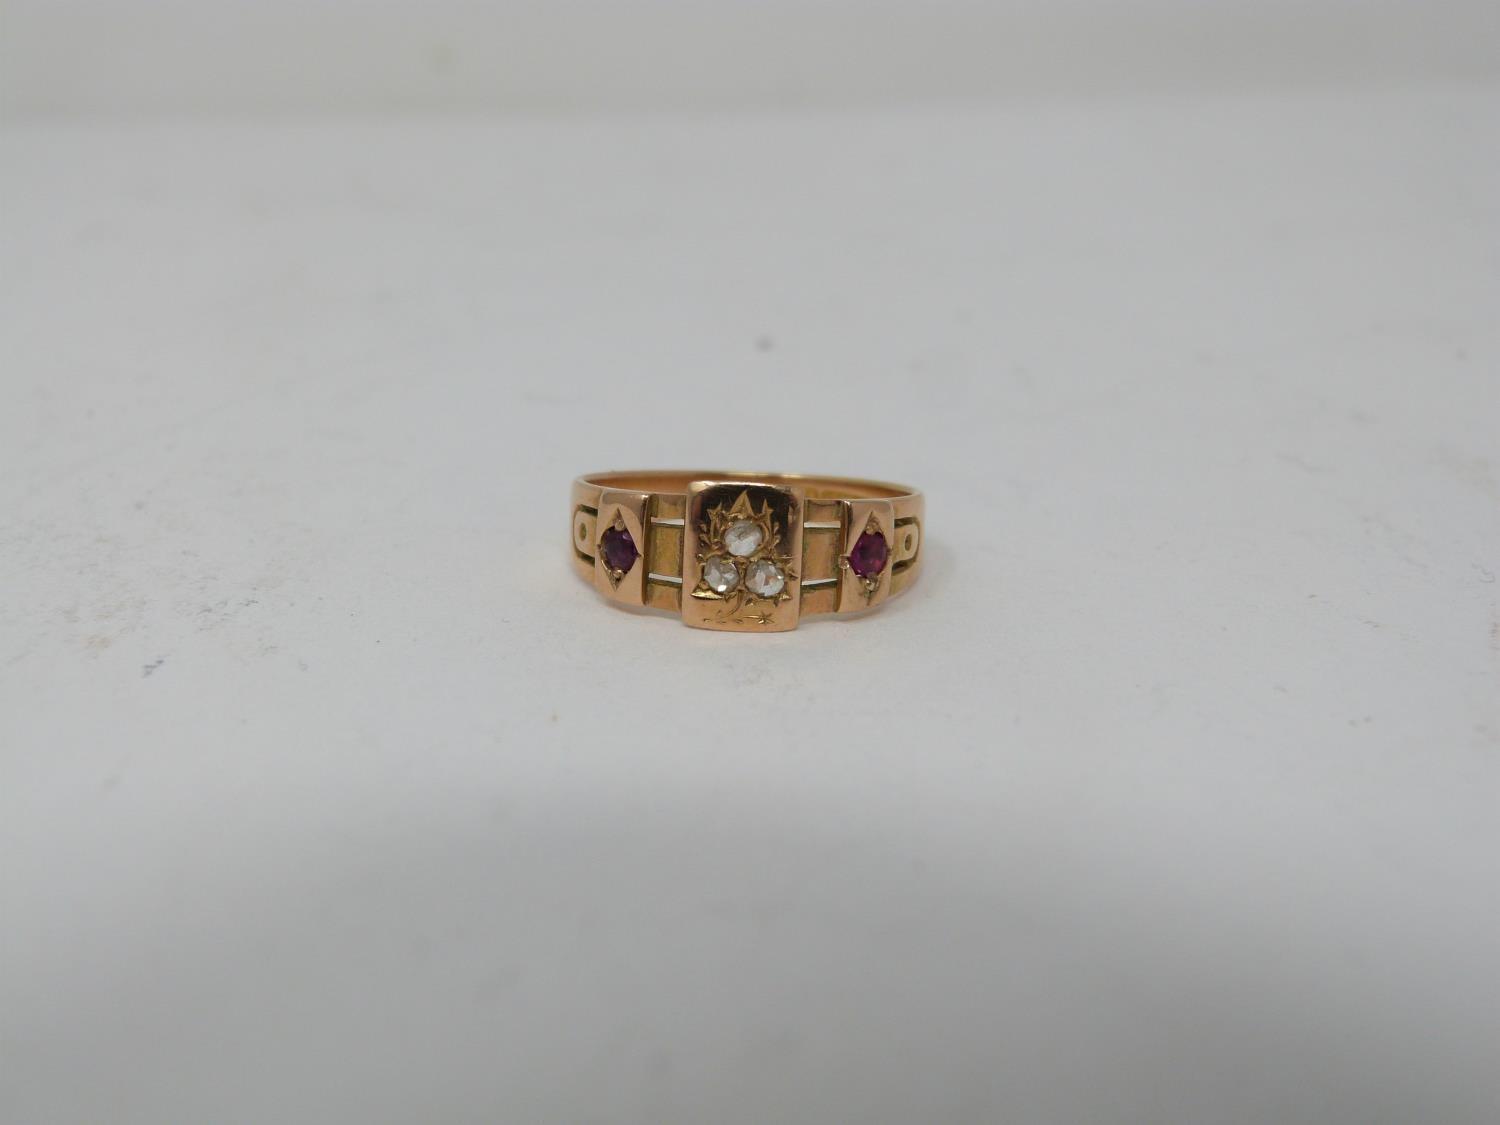 A Victorian 15ct yellow gold, Ruby and Rose cut diamond ring. Hallmarked, 625, 15ct, 1885. The - Image 2 of 7